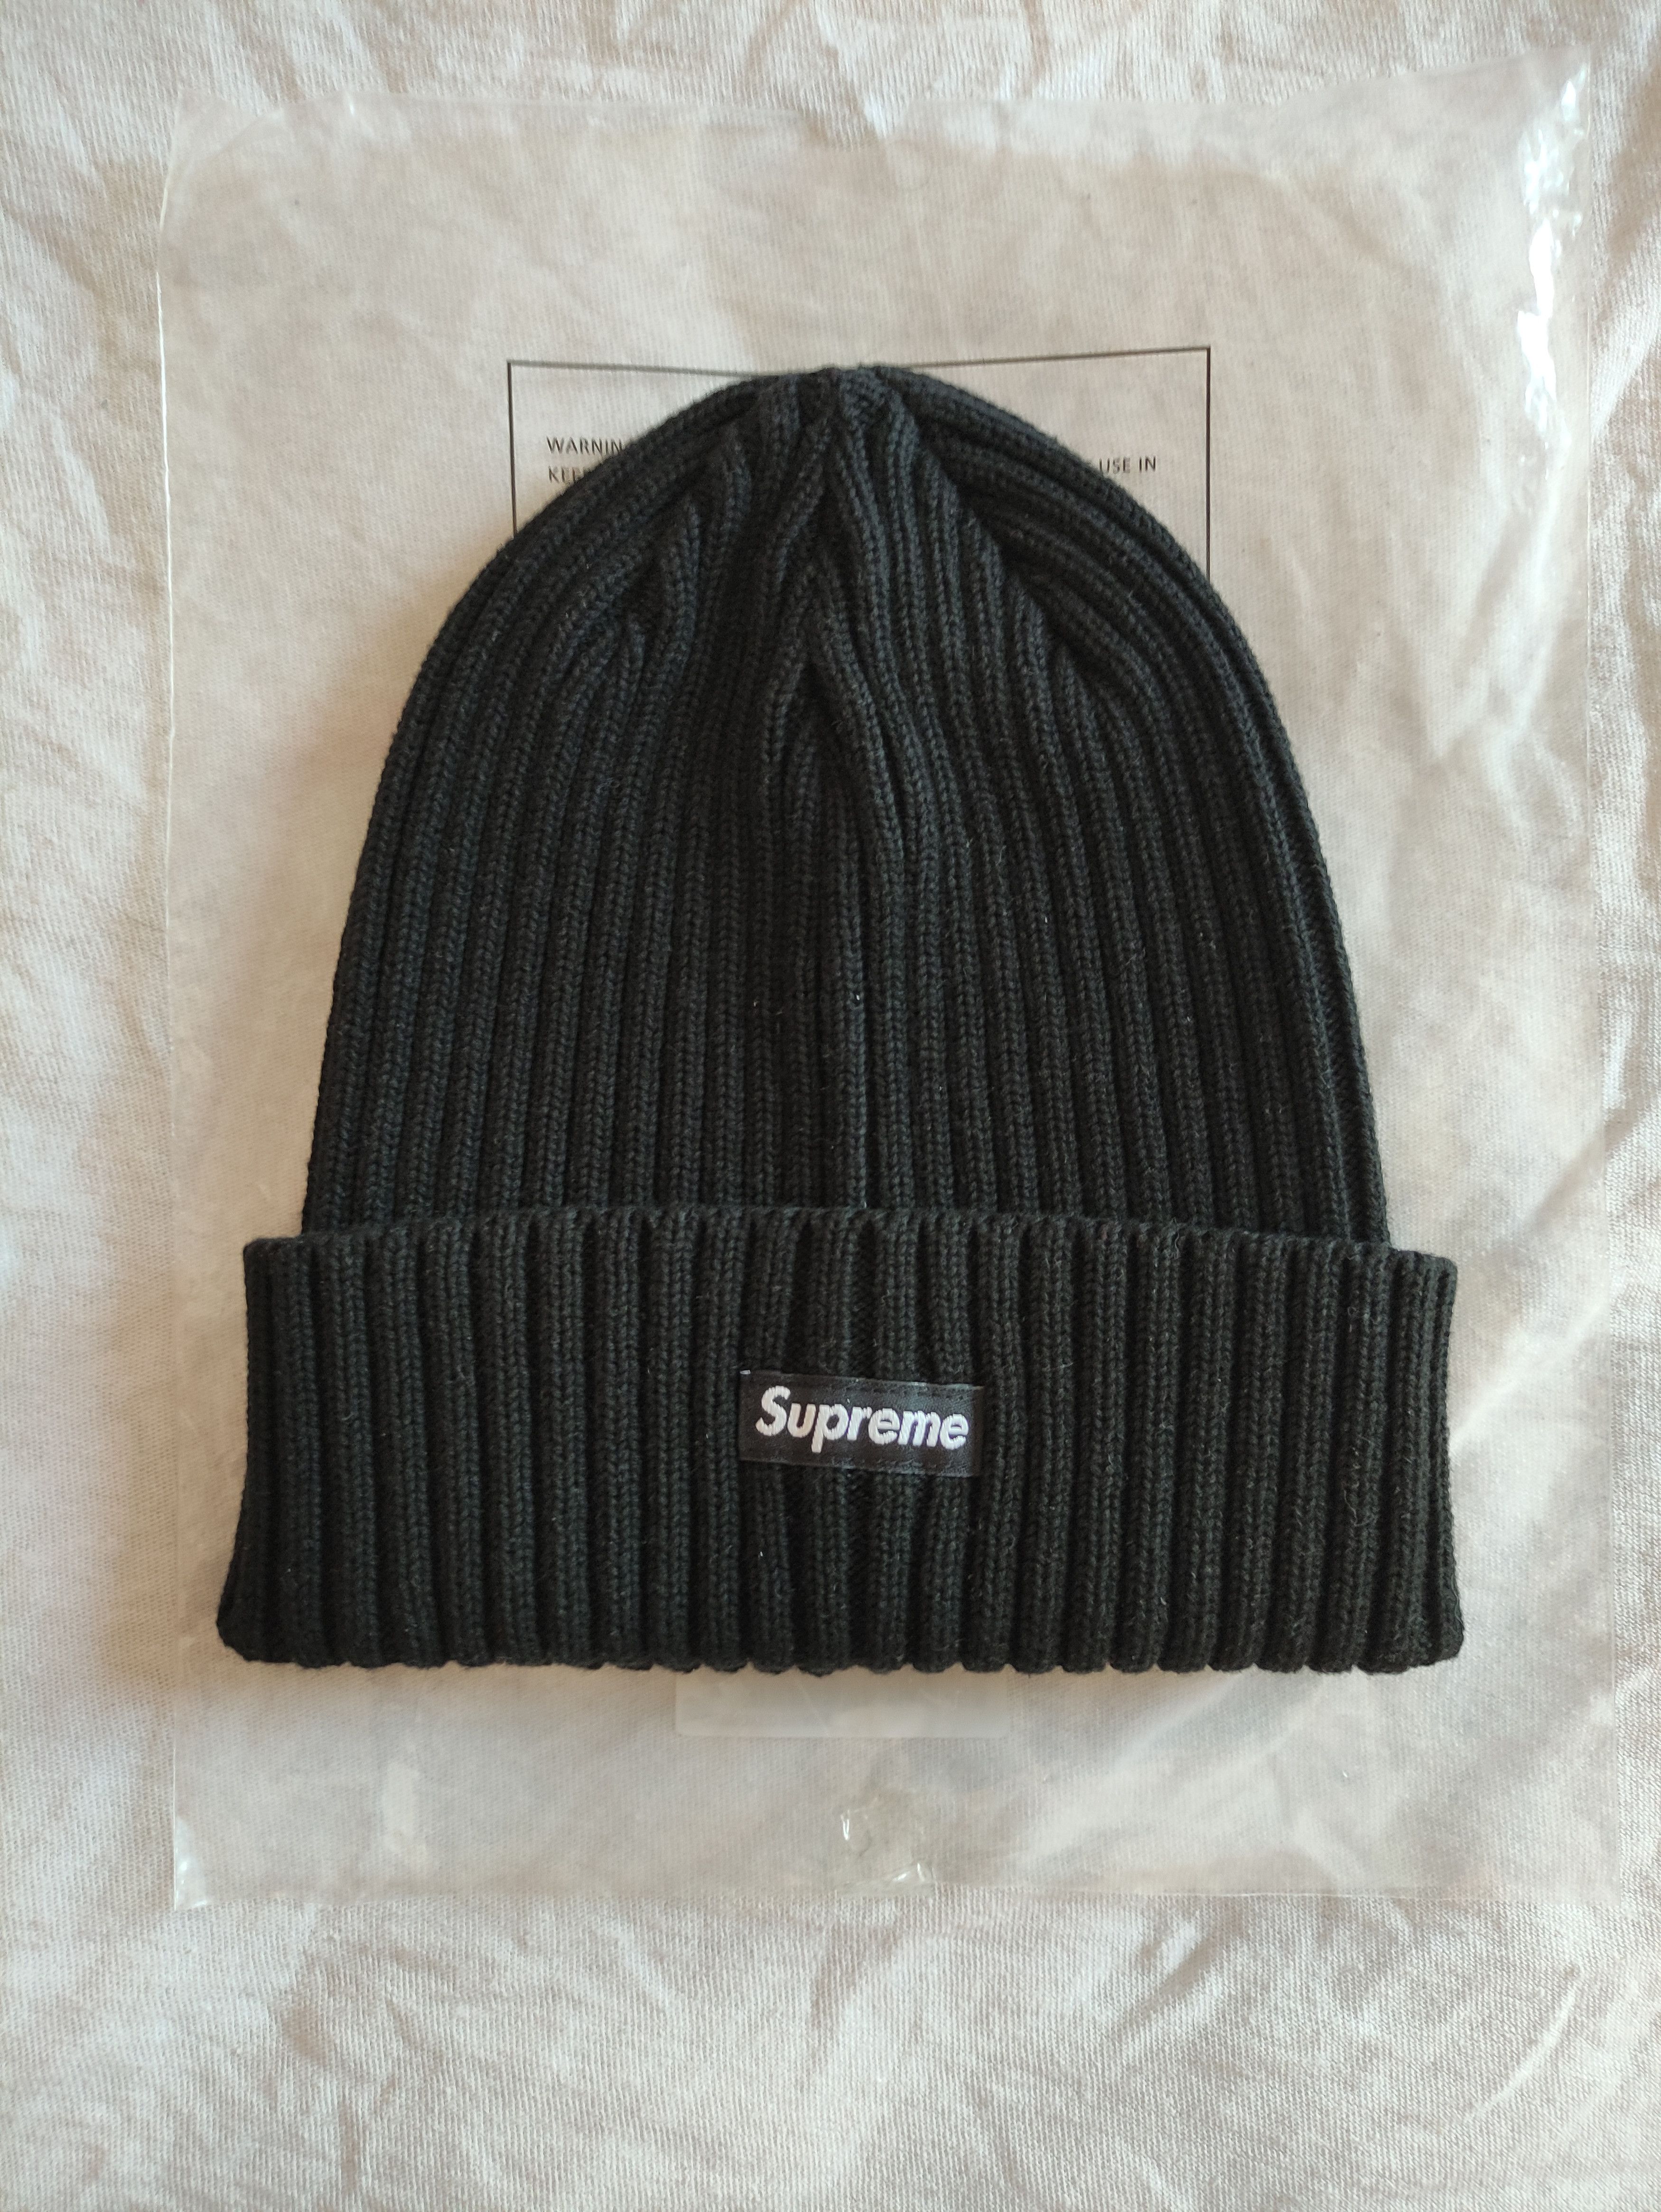 Supreme Supreme Overdyed Beanie / SS20 | Grailed